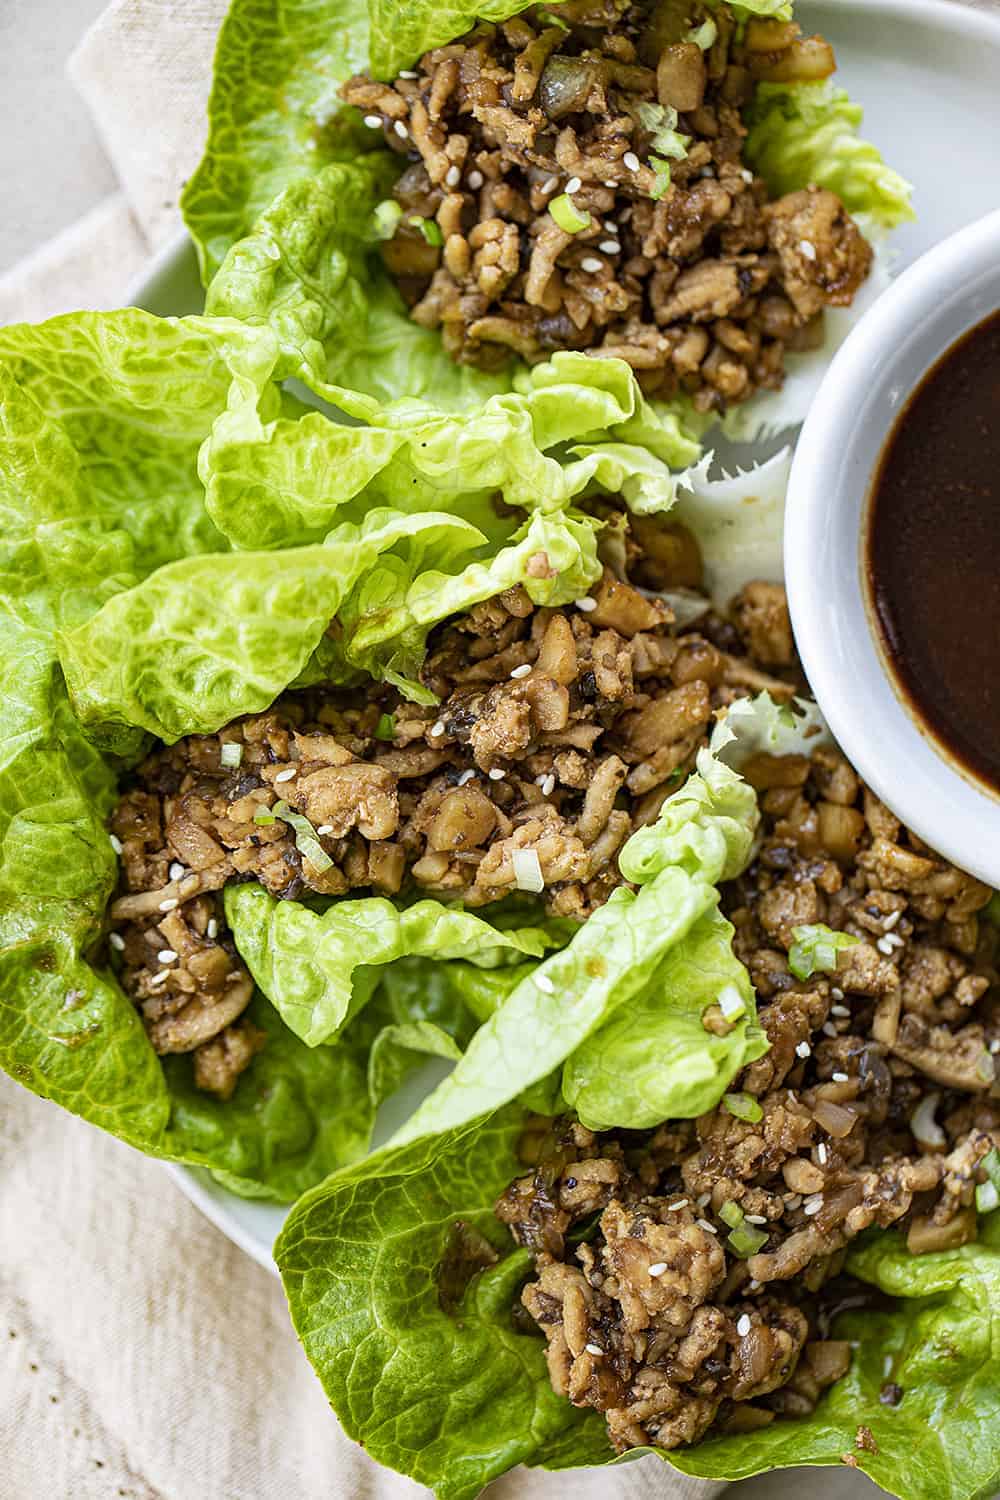 Overhead of a Plate with Chicken Lettuce Wraps